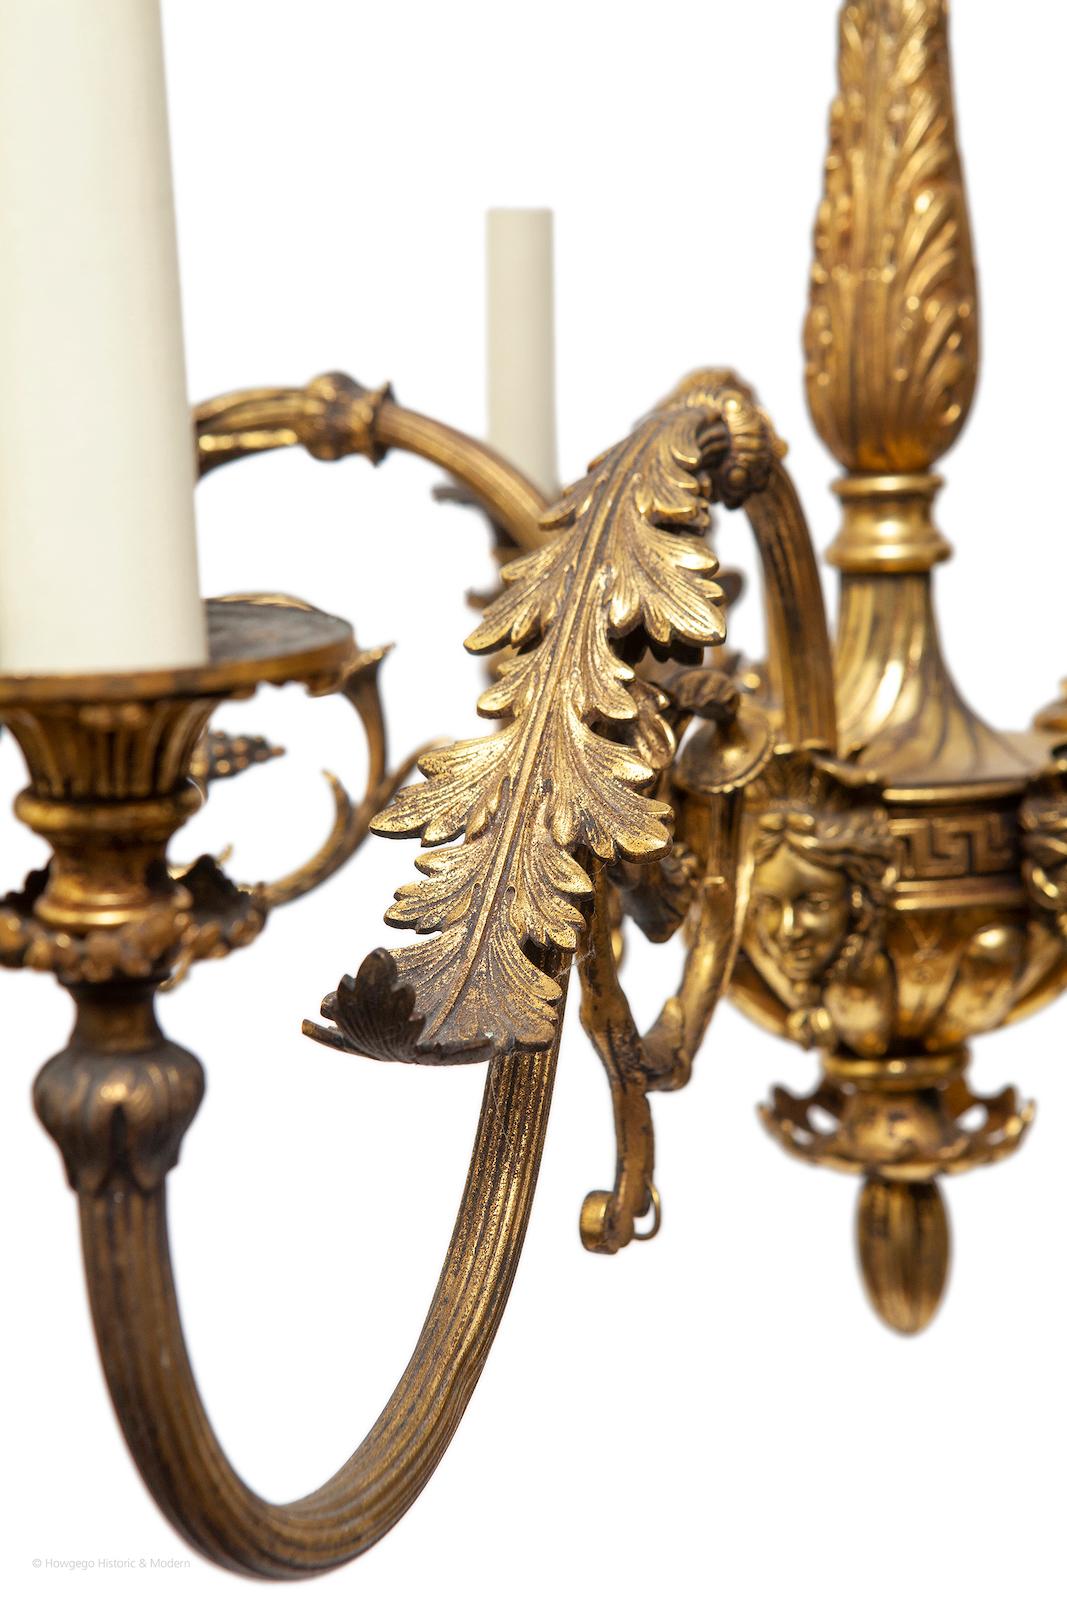 FINE, 19TH CENTURY, NEO-CLASSICAL, ORMOLU CHANDELIER, WITH 5 BRANCHES HEADED BY FEMALE MASKS, ELECTRIFIED, 31” high, 25” diameter

- Injects classical elegance, grandeur and atmosphere into the interior
- Particularly fine detail and working, the